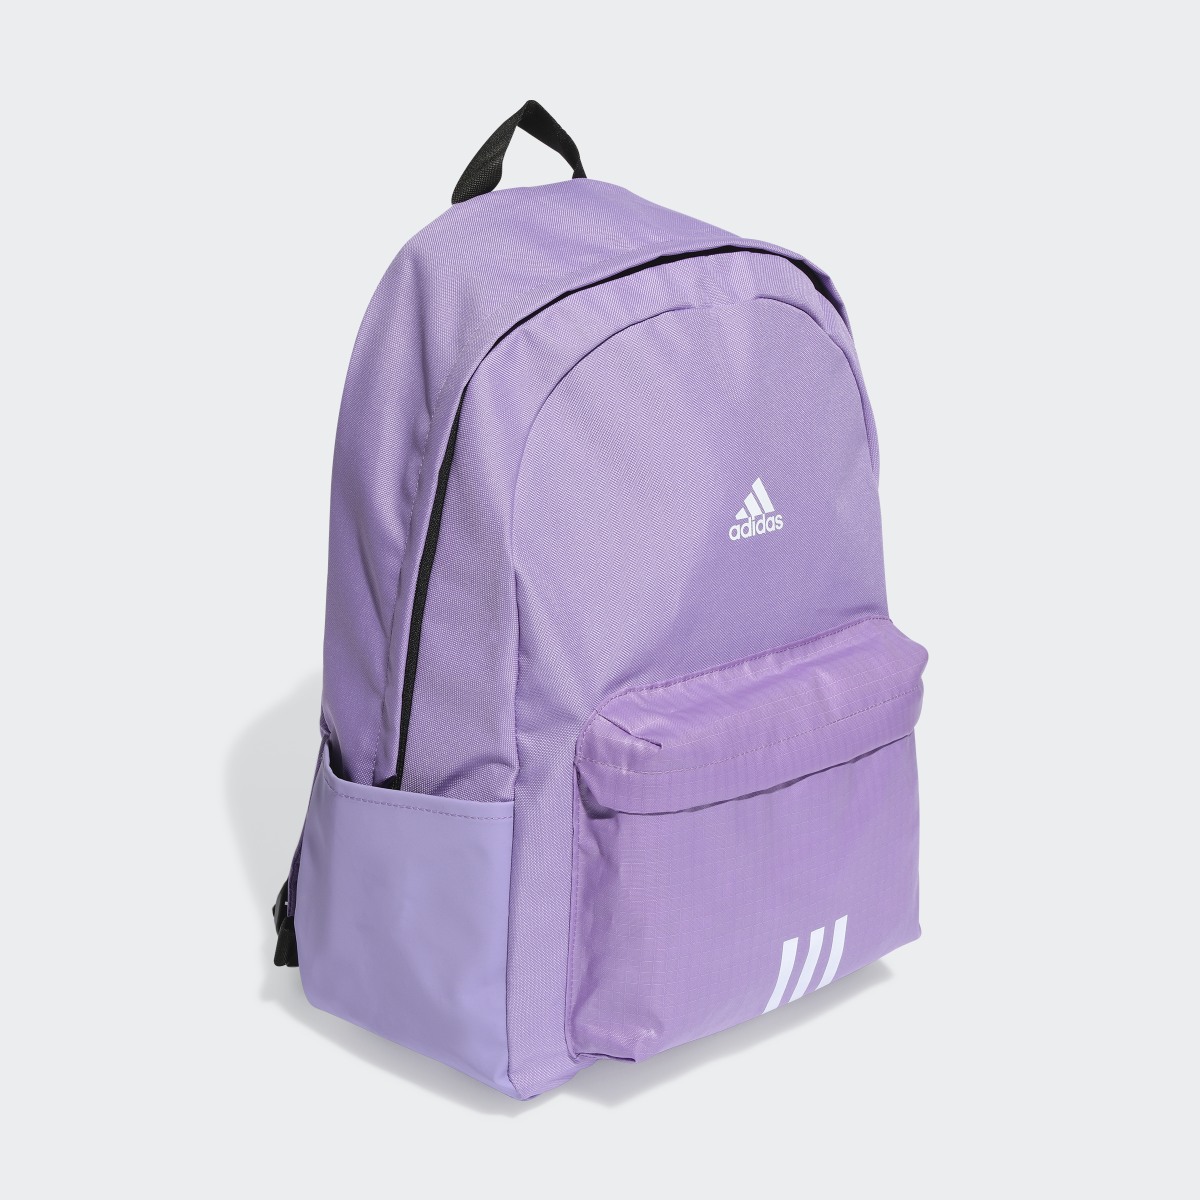 Adidas Classic Badge of Sport 3-Stripes Backpack. 4